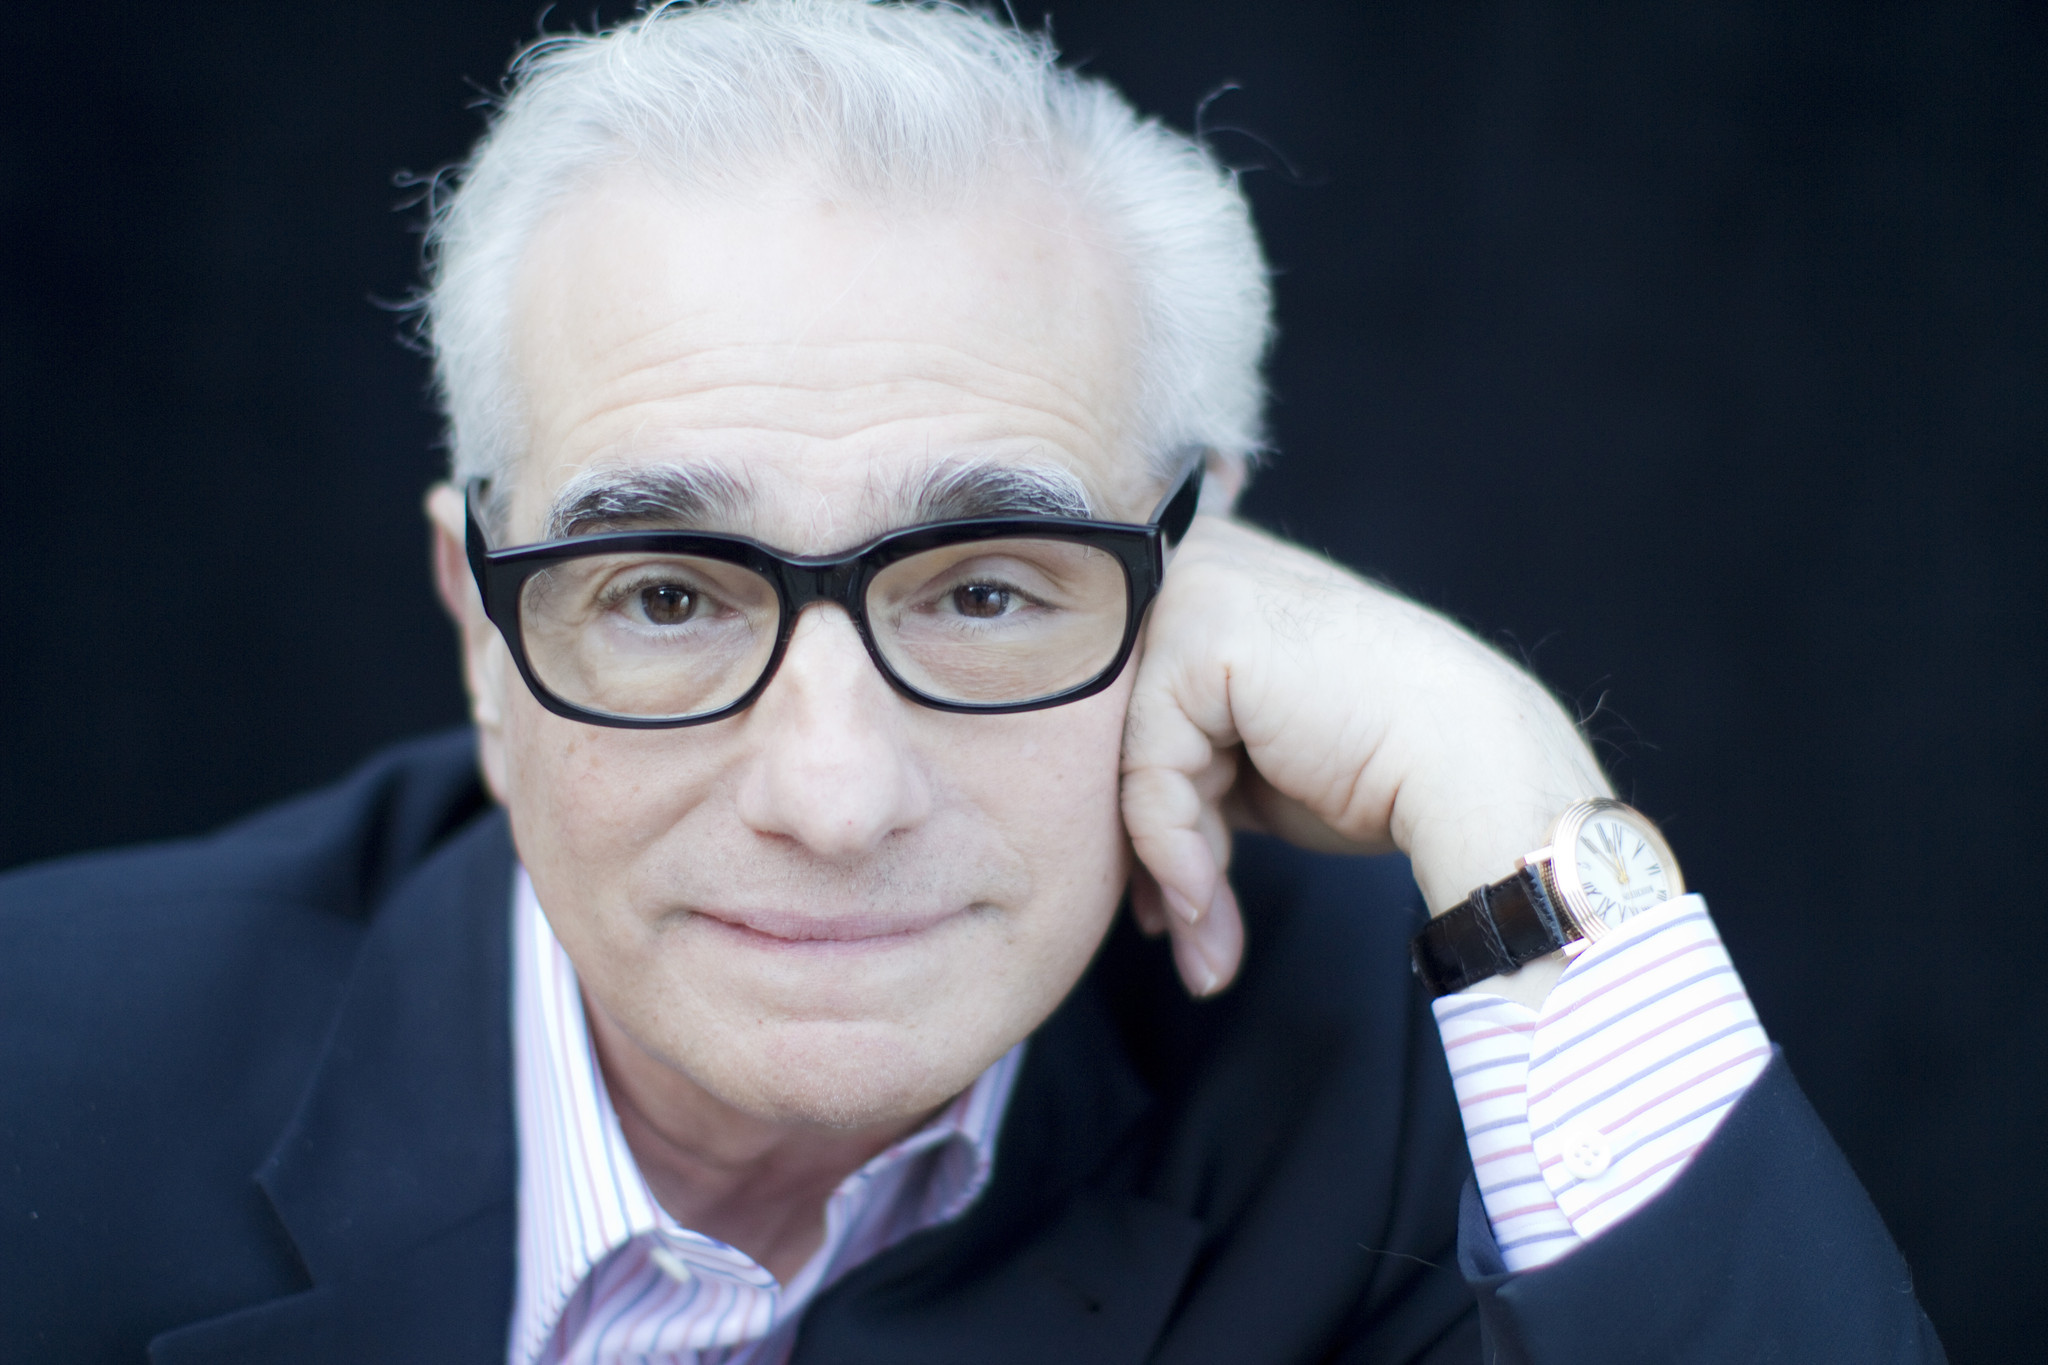 LOS ANGELES, CA -- FRIDAY, DECEMBER 20, 2013:  Filmmaker Martin Scorsese is photographed at the Hotel Bel-Air in Los Angeles, CA on Friday, December 20, 2013. ( Liz O. Baylen / Los Angeles Times )